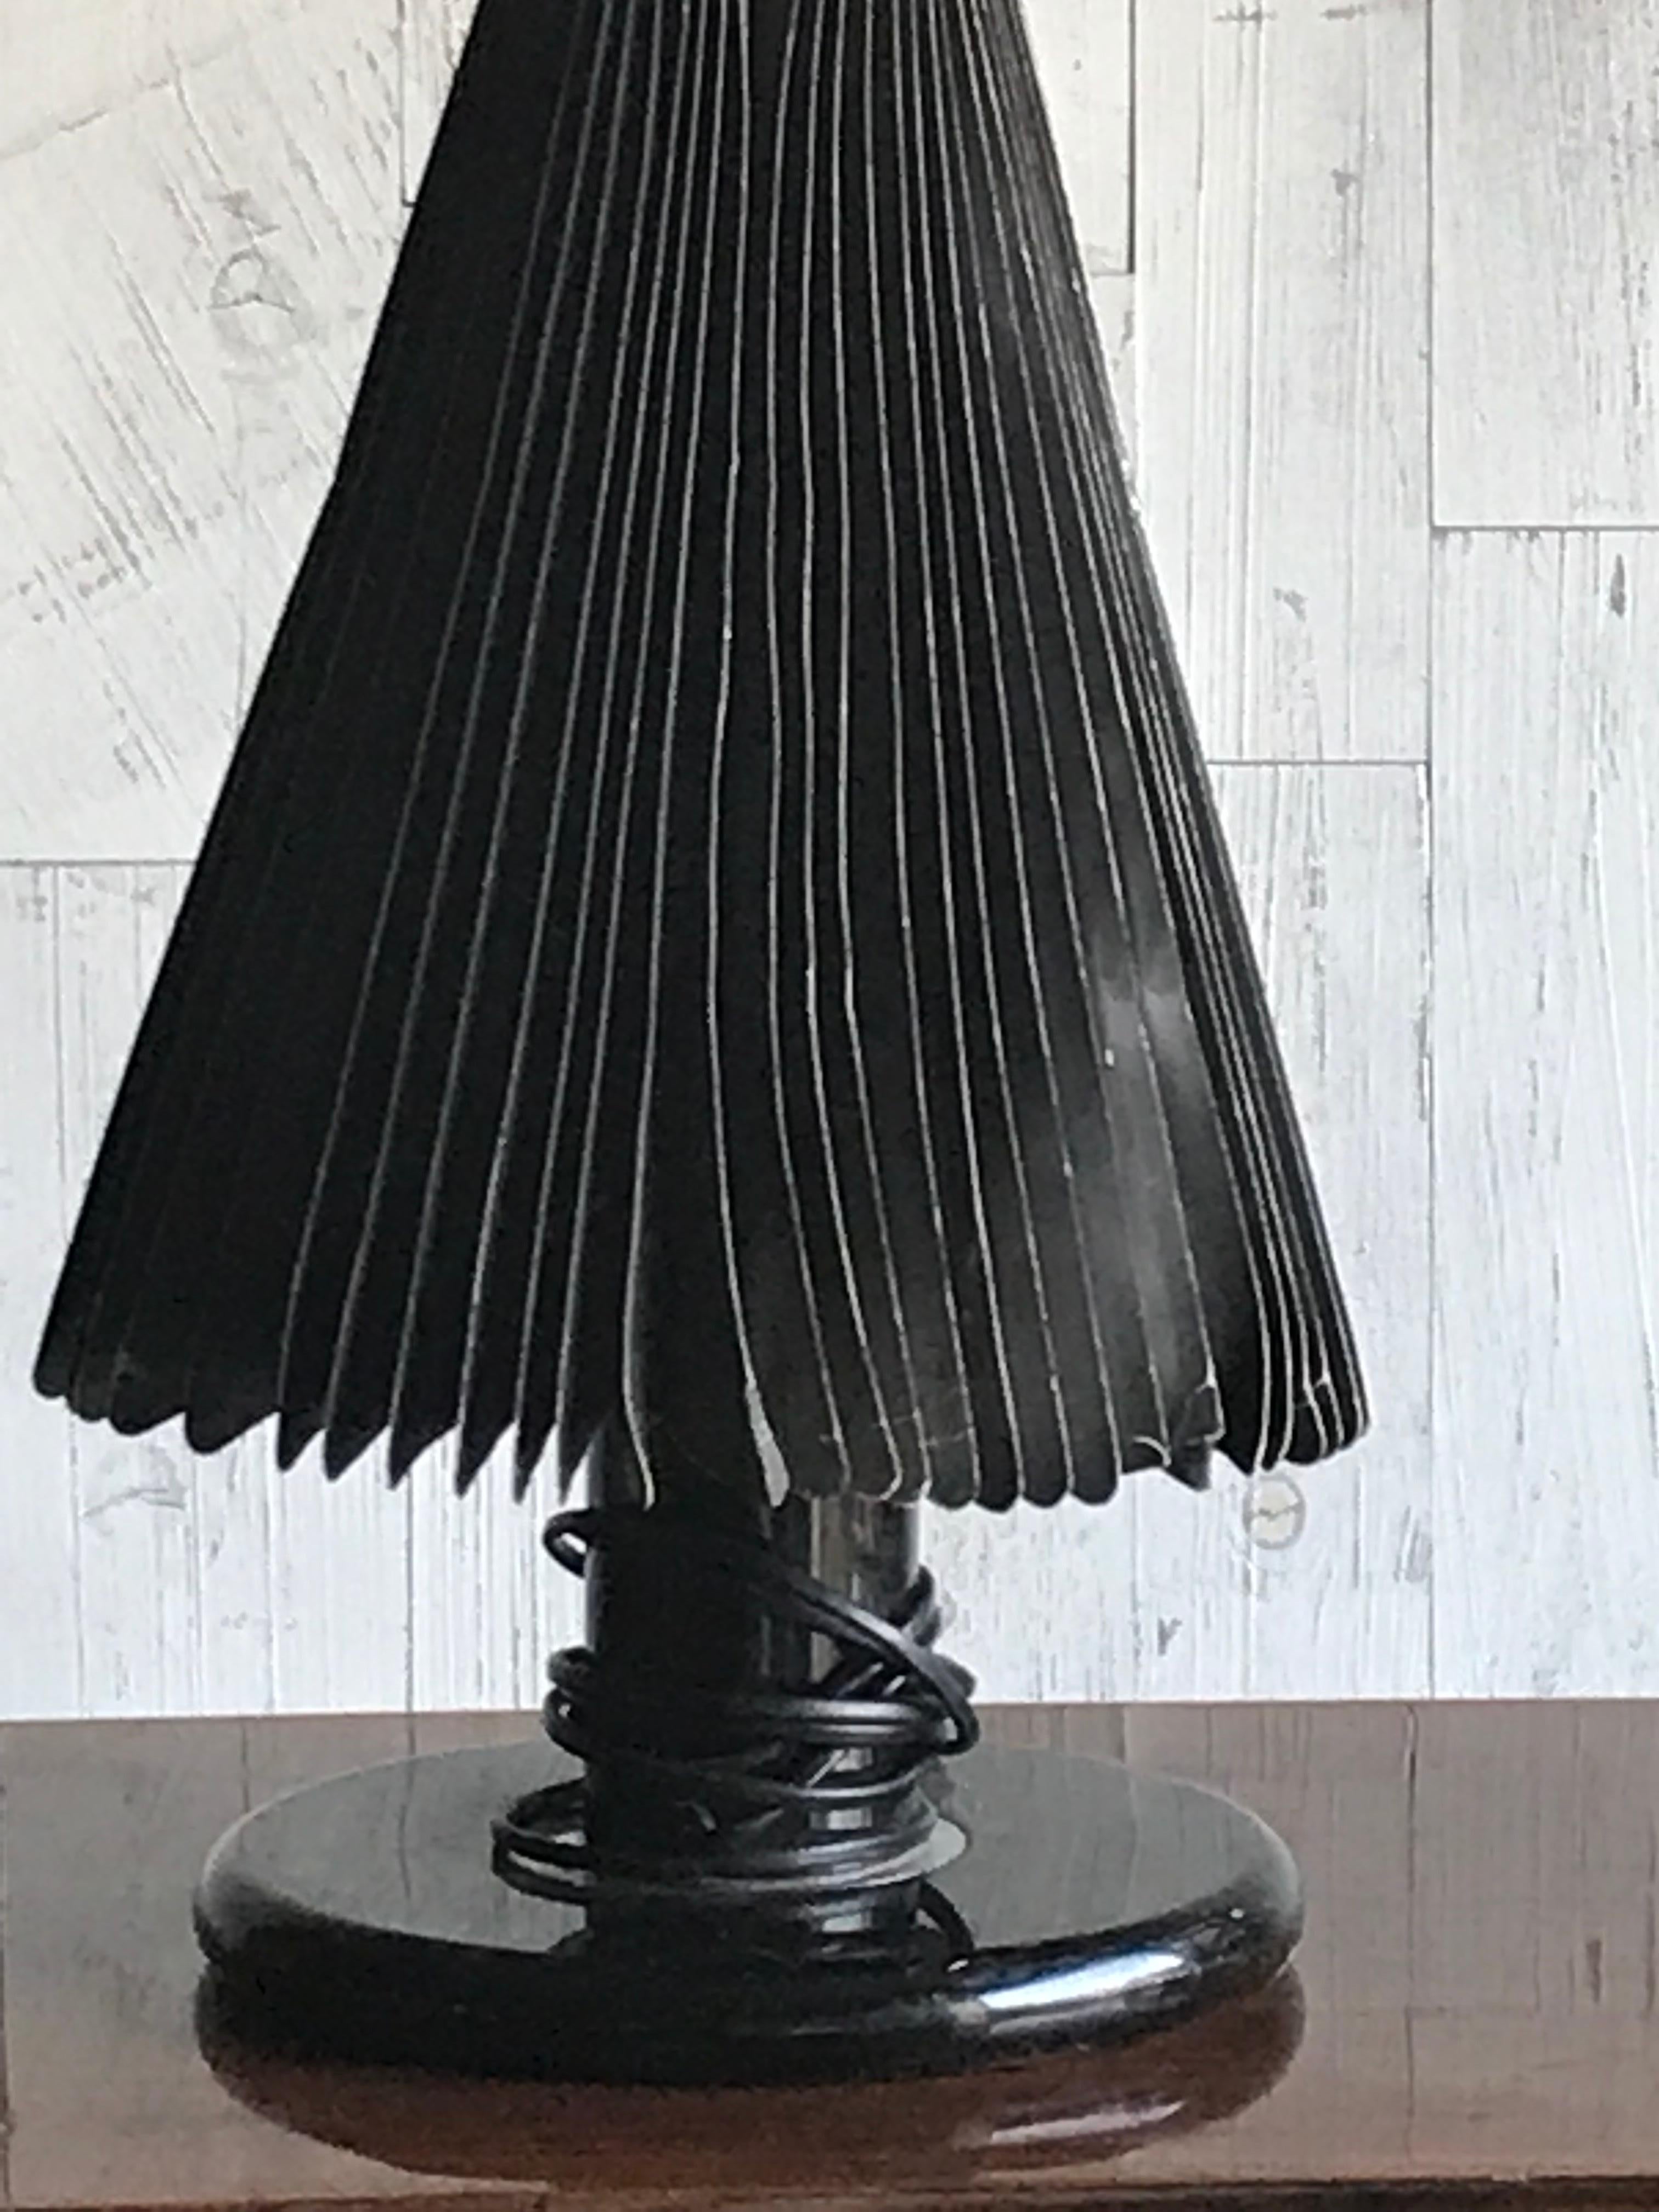 Mid-Century Modern table lamp, 1950s
Metal table lamp with a paper shade.